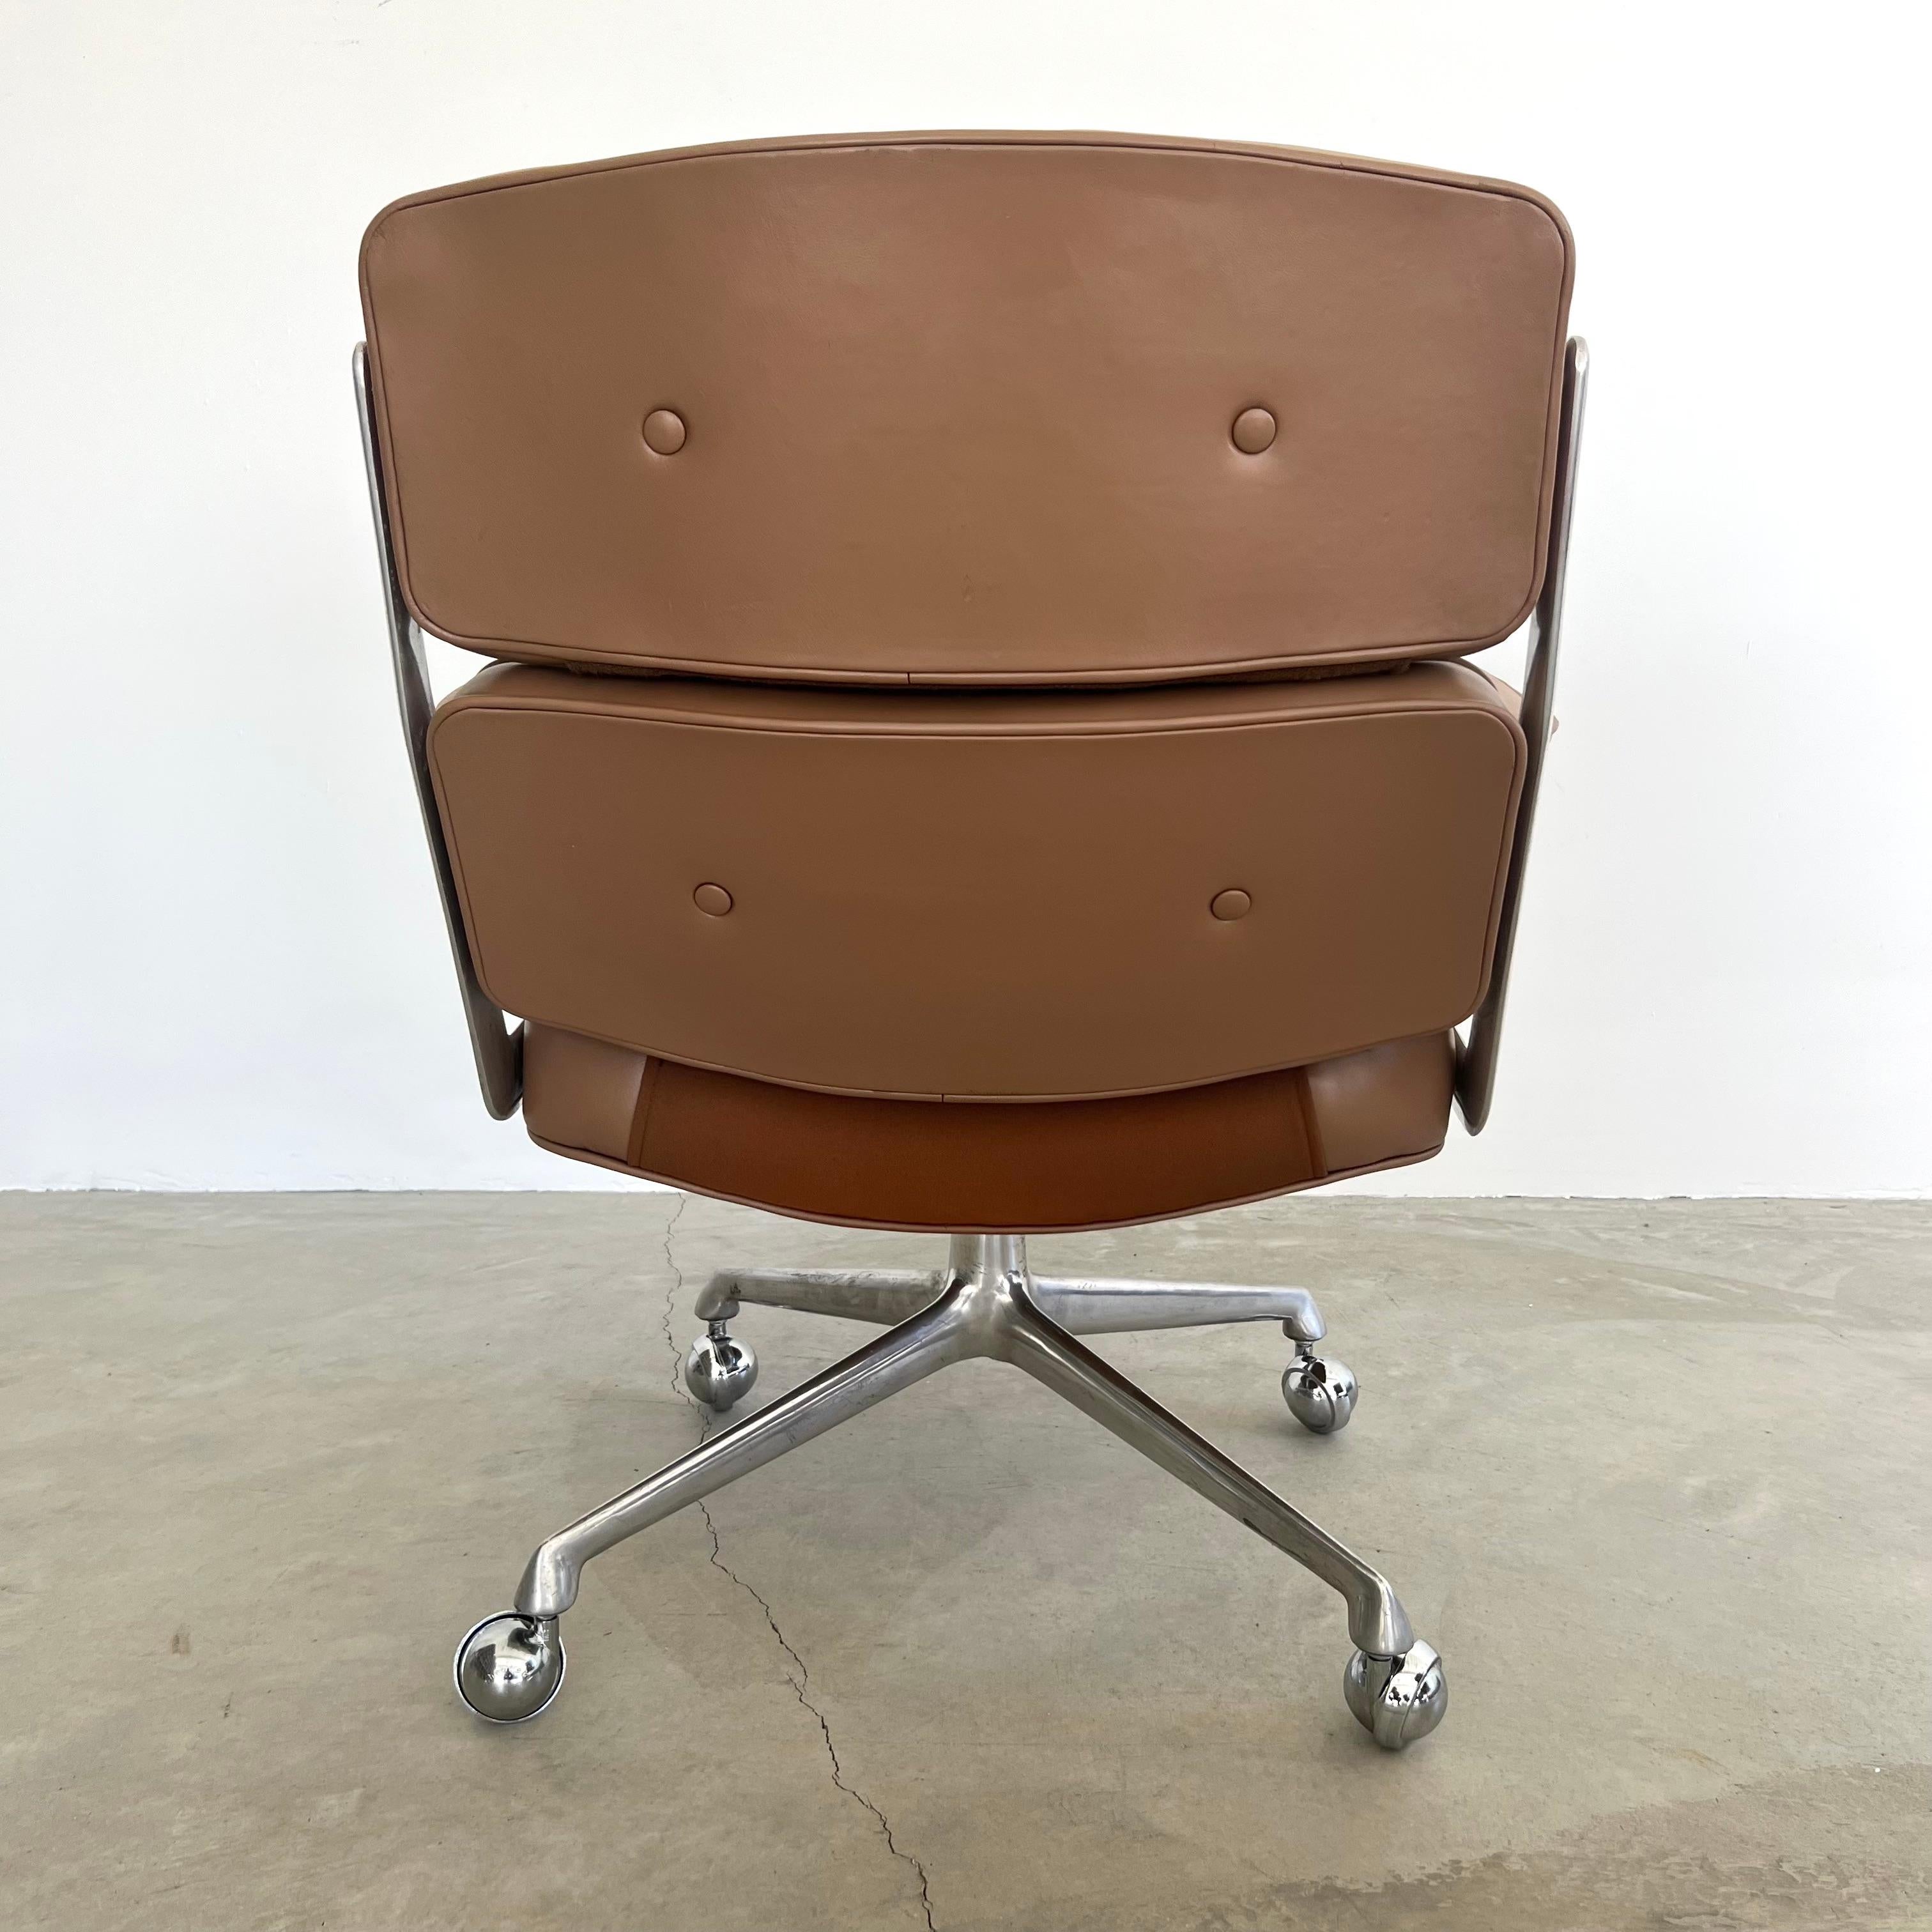 Late 20th Century Eames Time Life Chair in Tan Leather for Herman Miller, 1980s USA